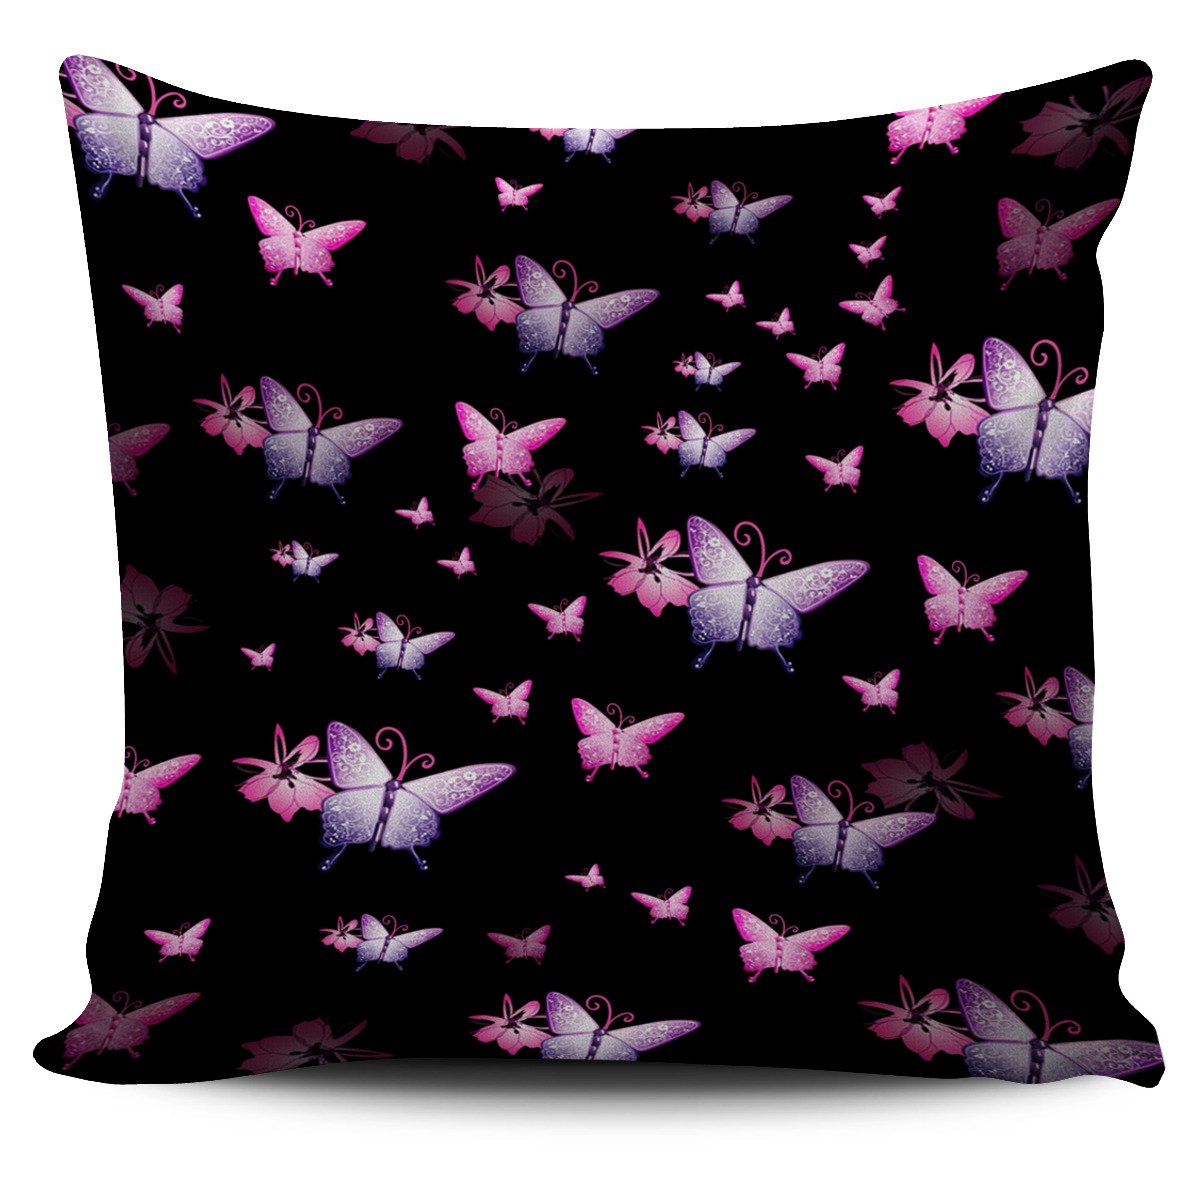 Butterfly Pillow Covers